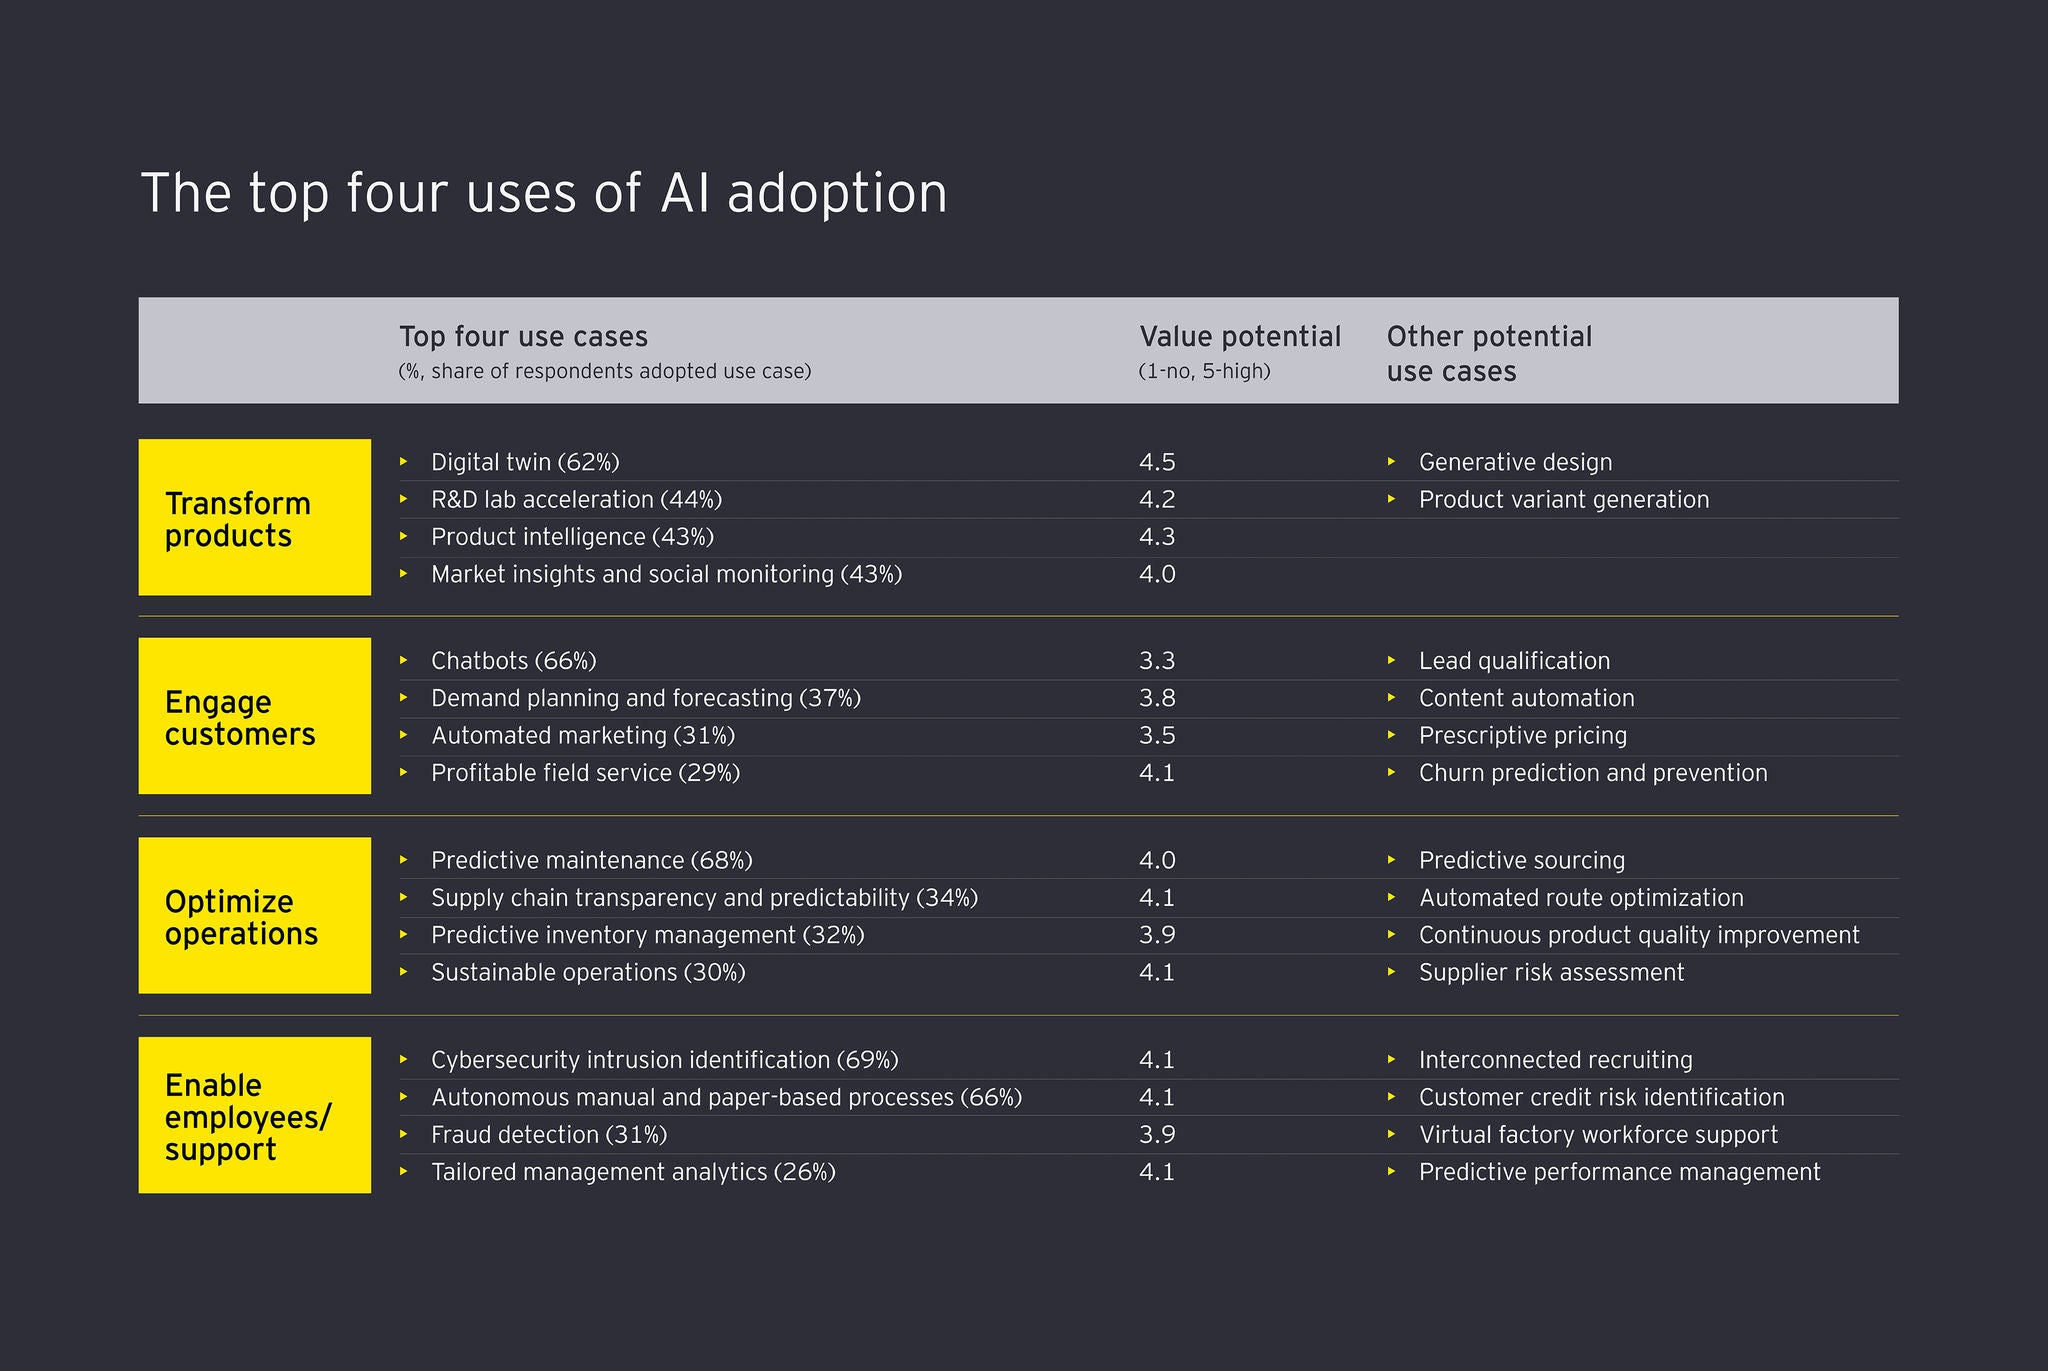 ey-the-top-four-uses-of-ai-adoption-2020